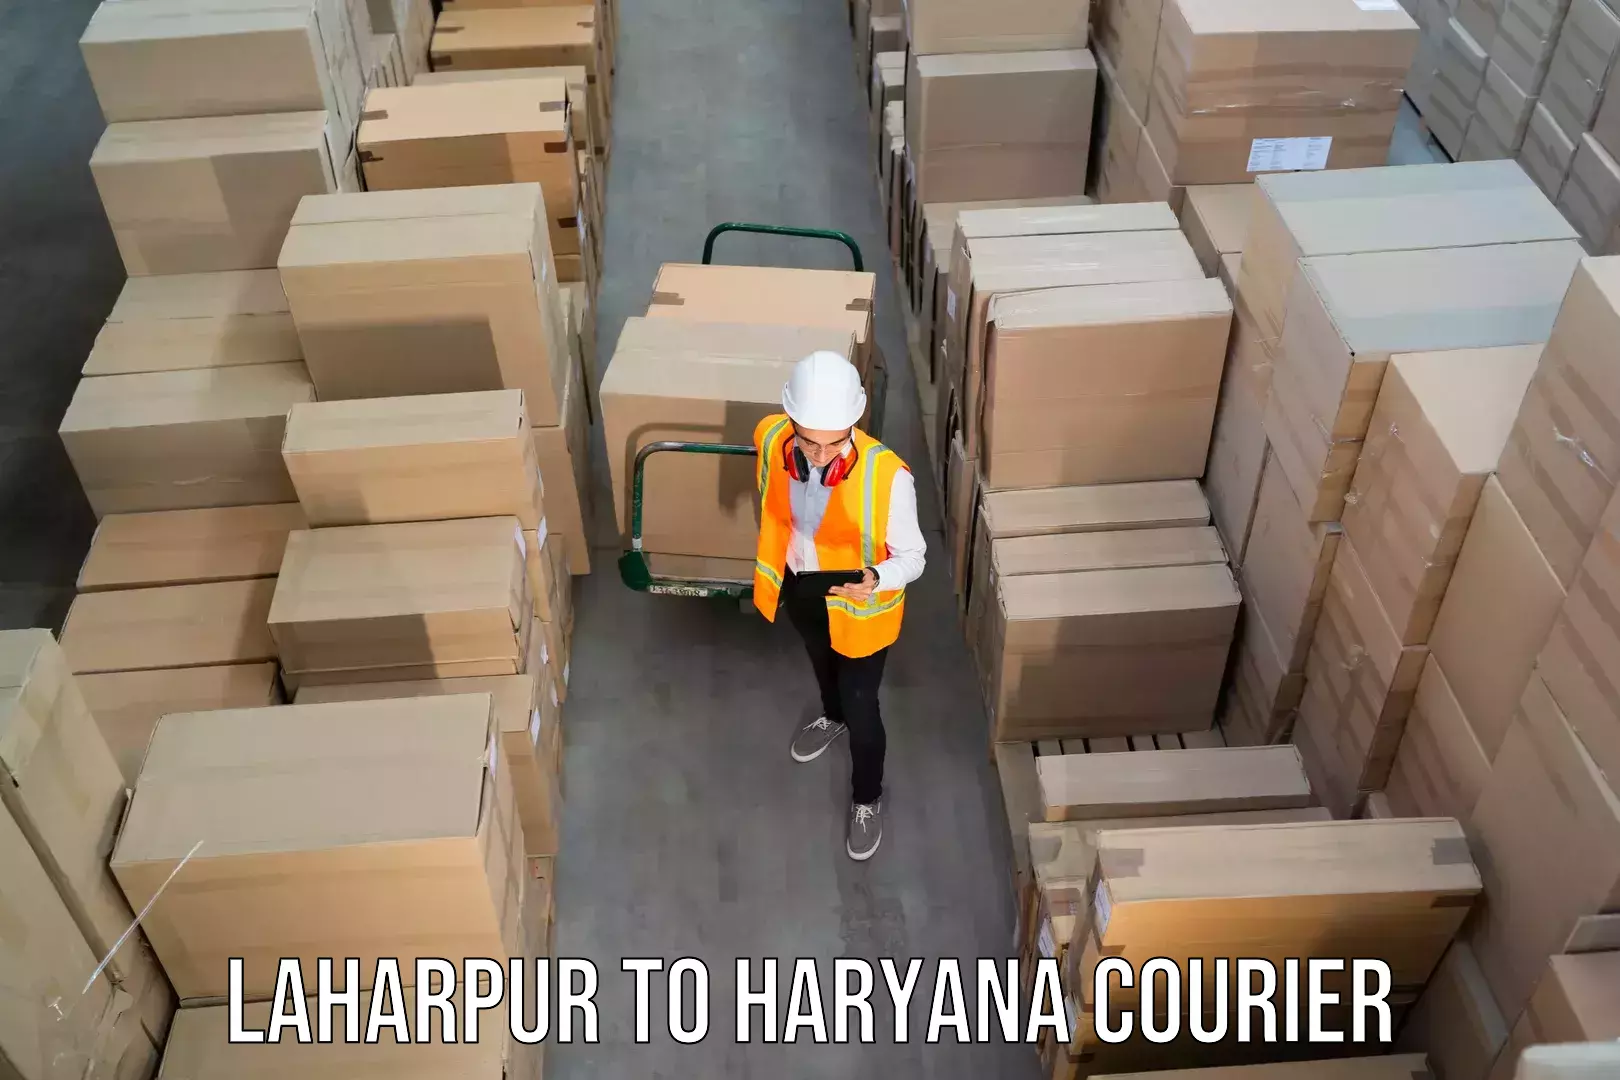 Multi-national courier services Laharpur to Charkhi Dadri